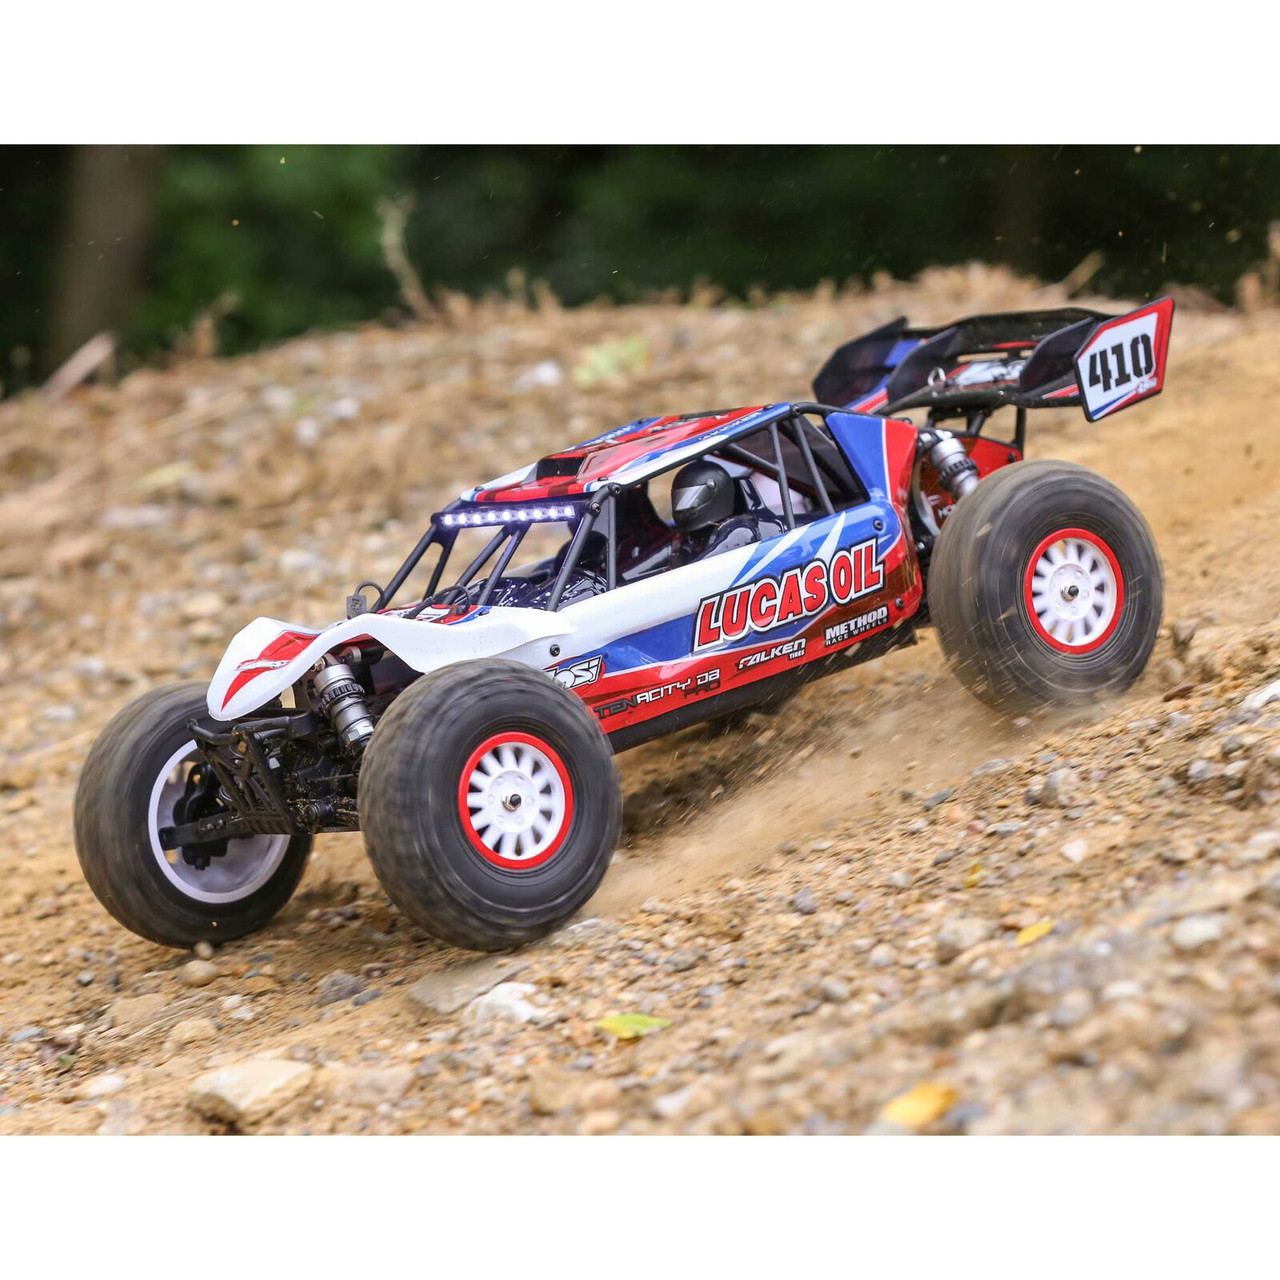 Losi 1/10 Tenacity DB Pro 4WD Desert Buggy Brushless RTR with Smart, Lucas Oil